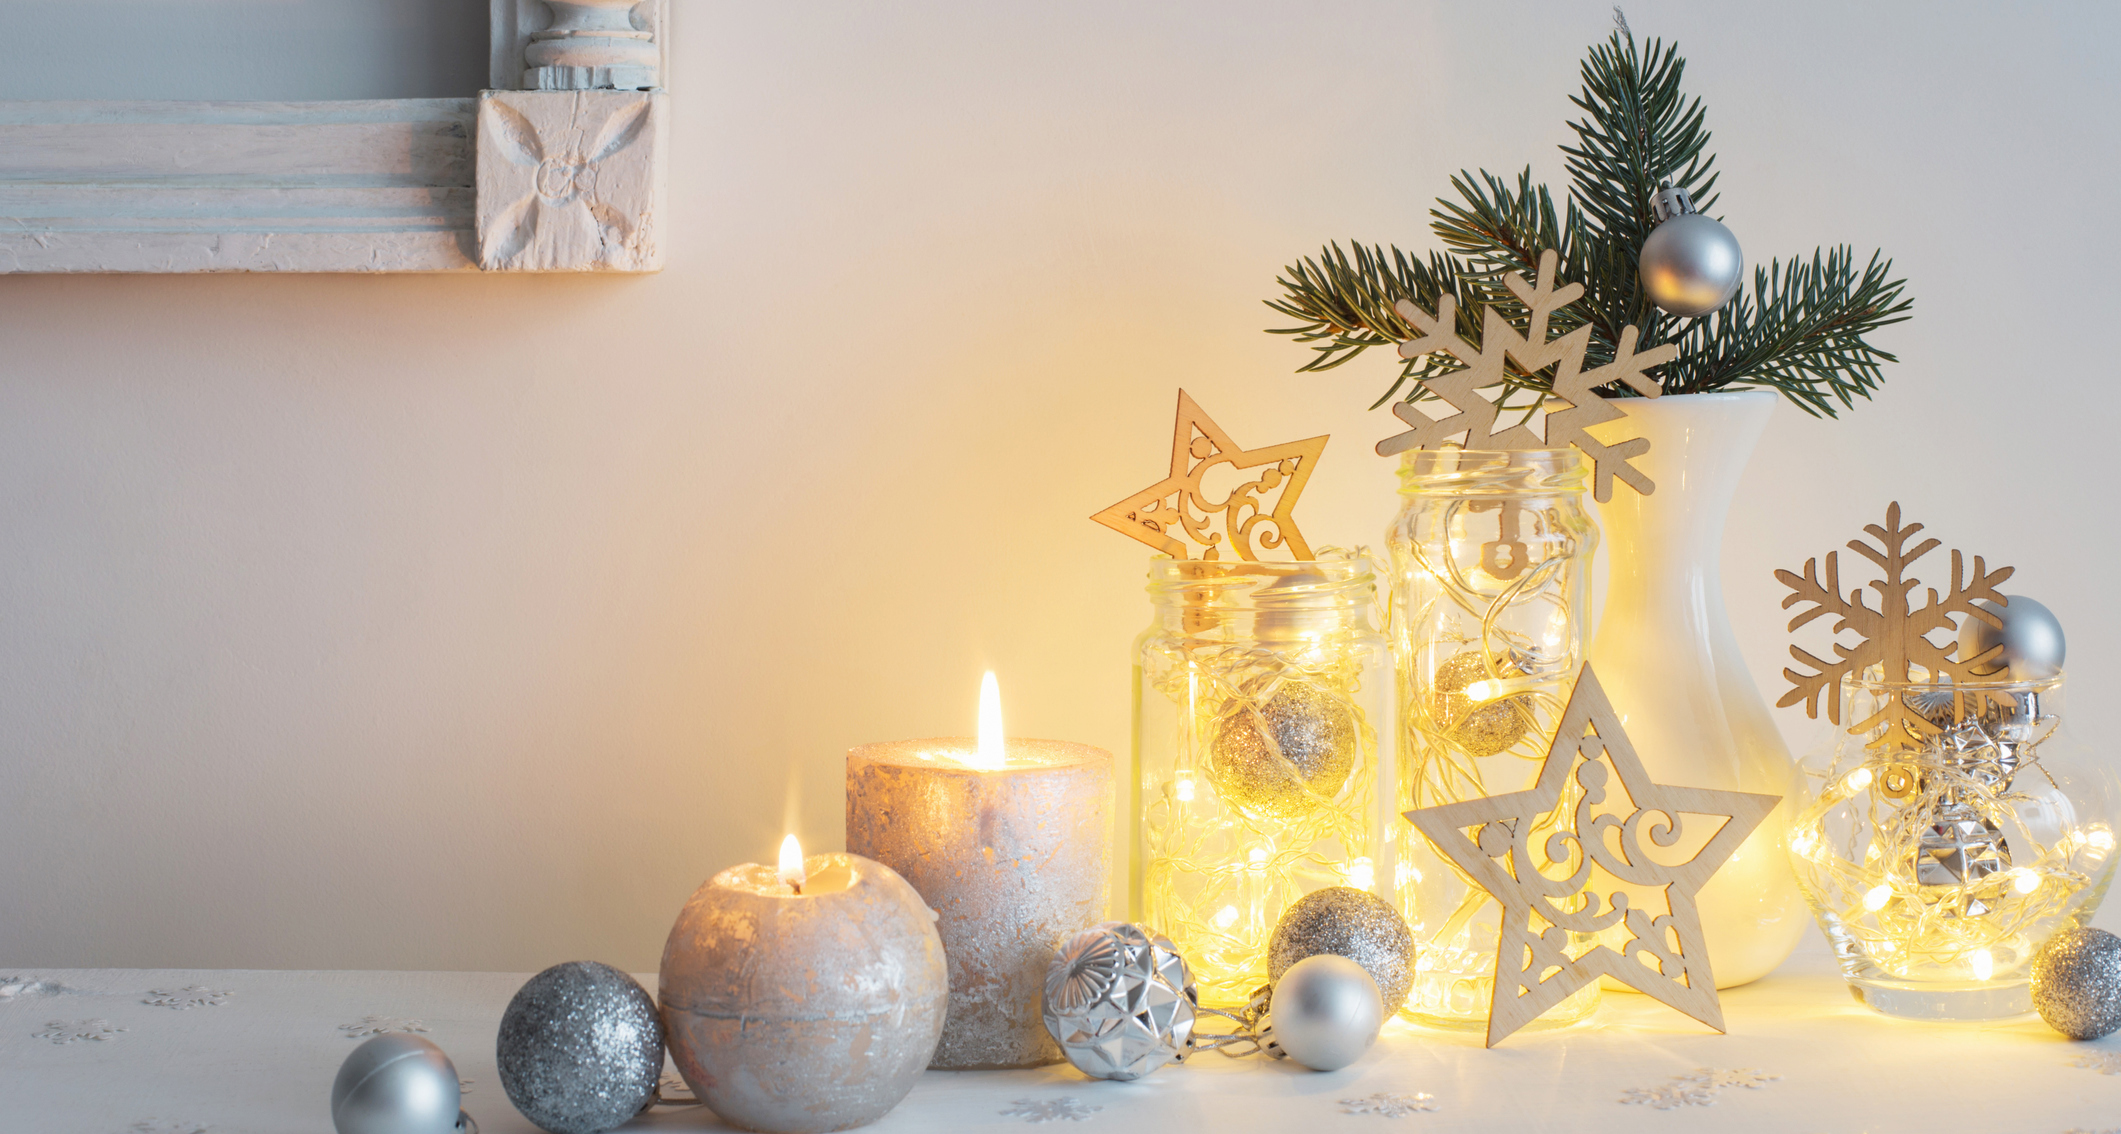 staging a home during the holidays